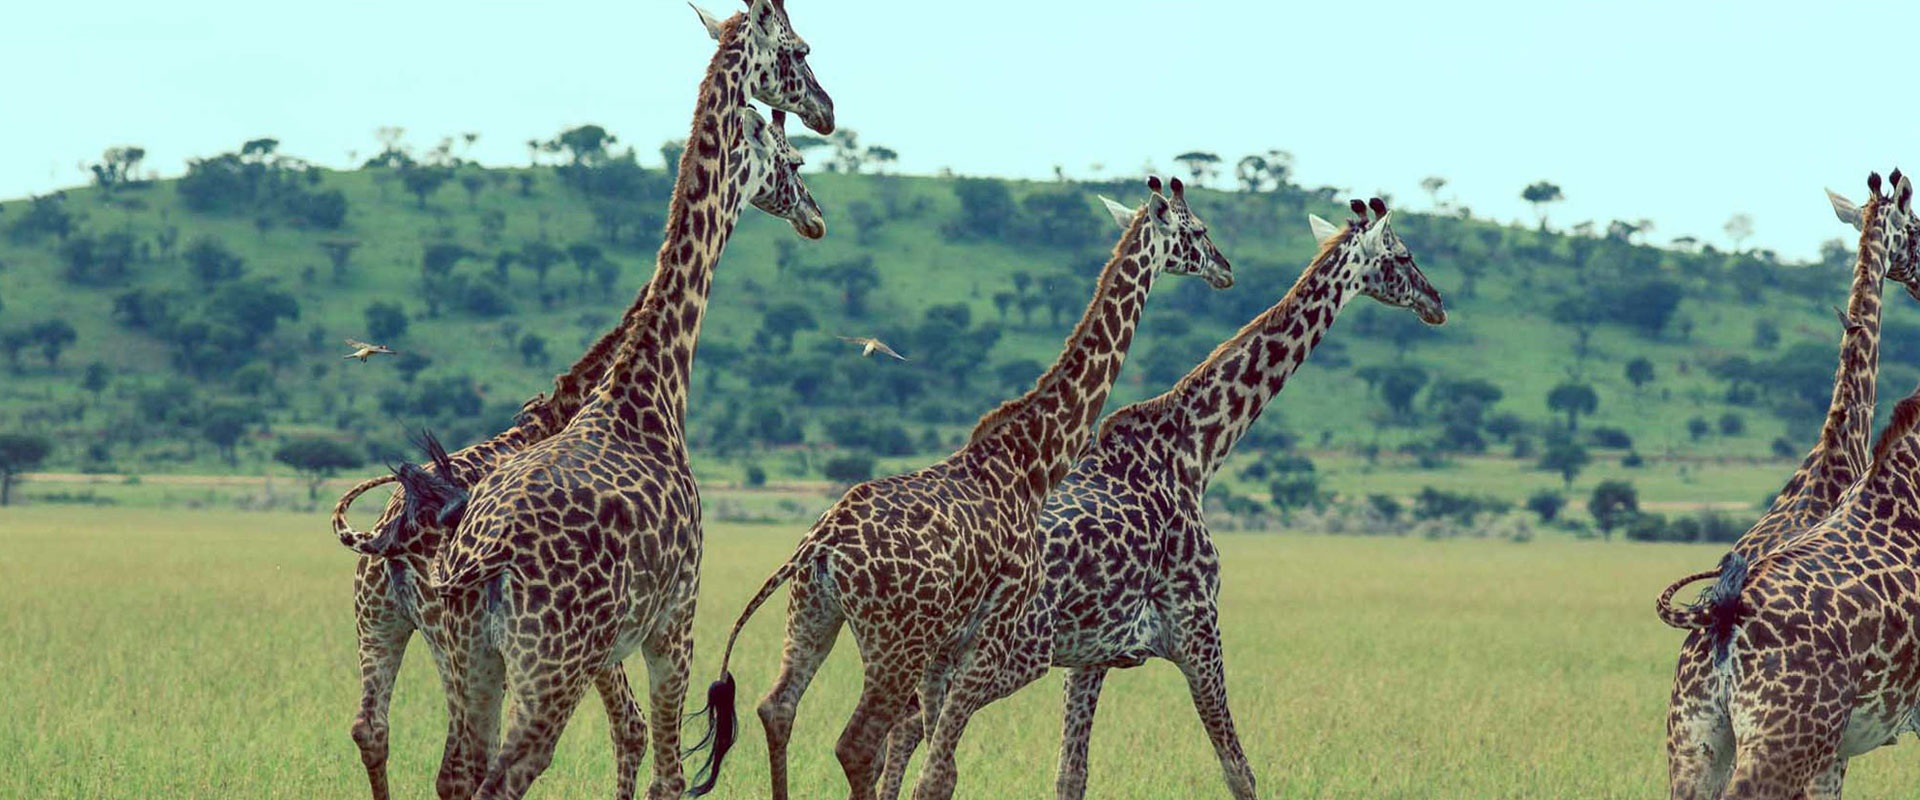 Tanzania National Parks - 16 Best National Parks in Tanzania